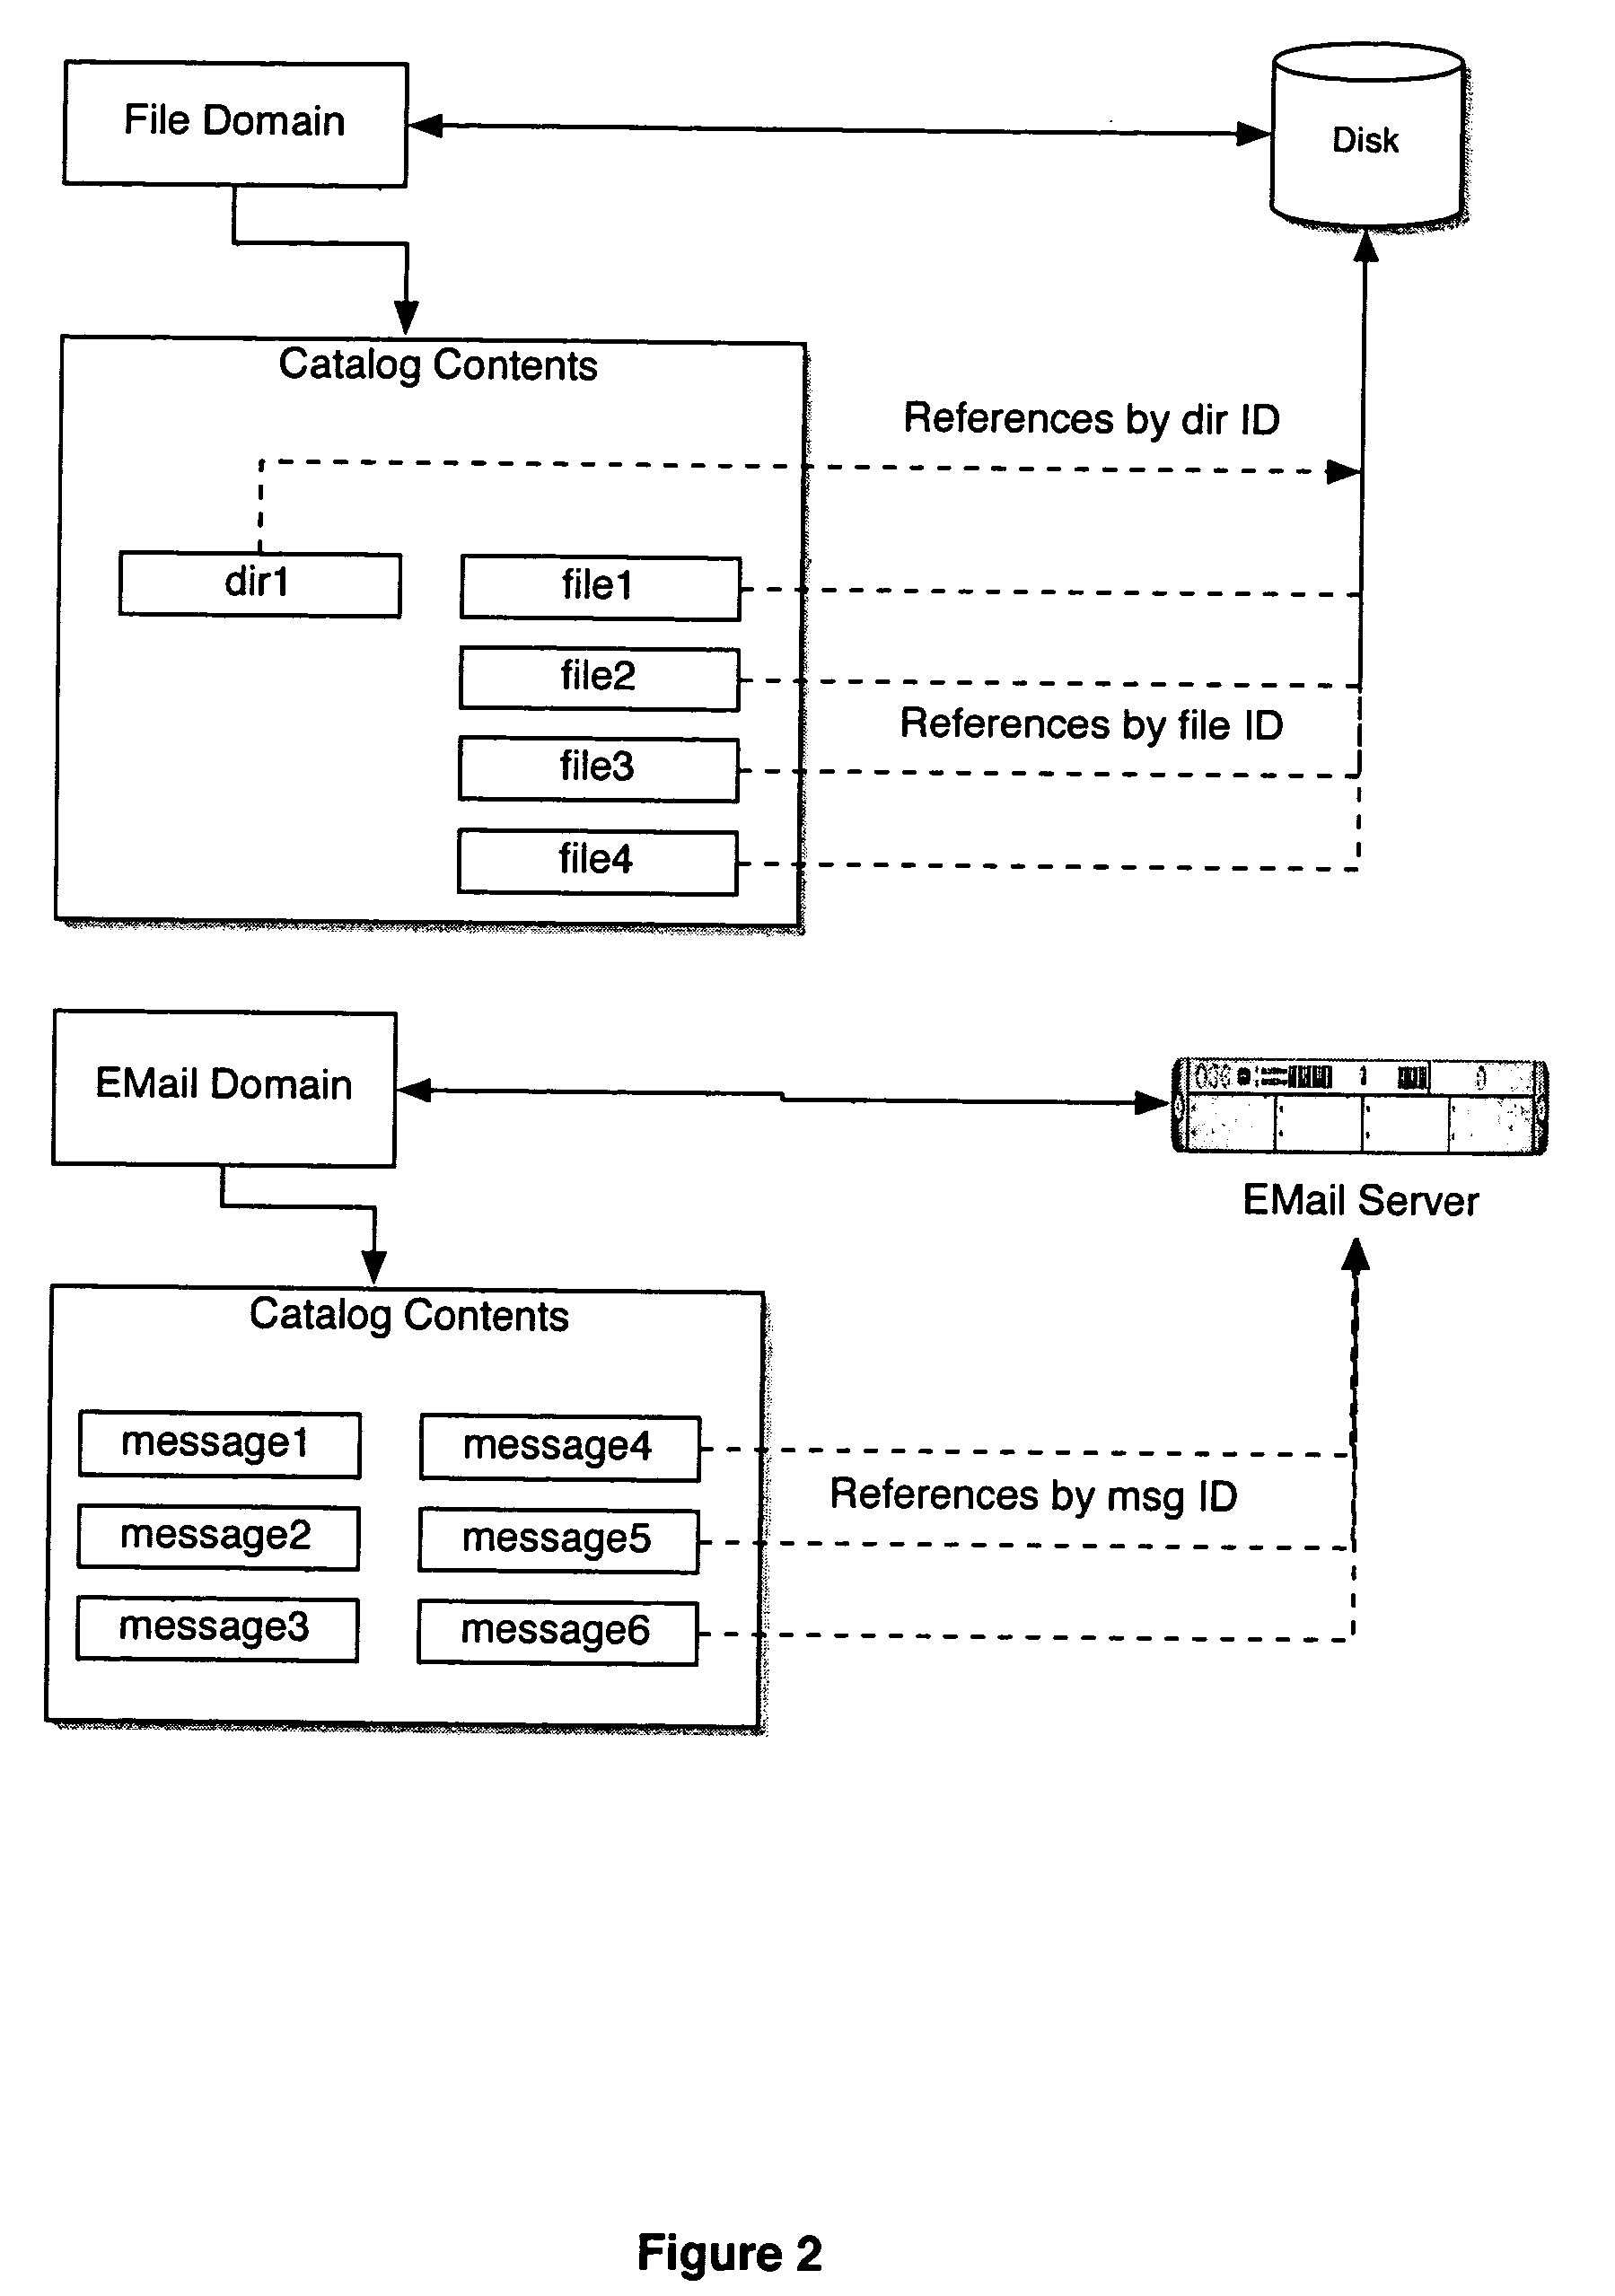 Computer system for automatic organization, indexing and viewing of information from multiple sources